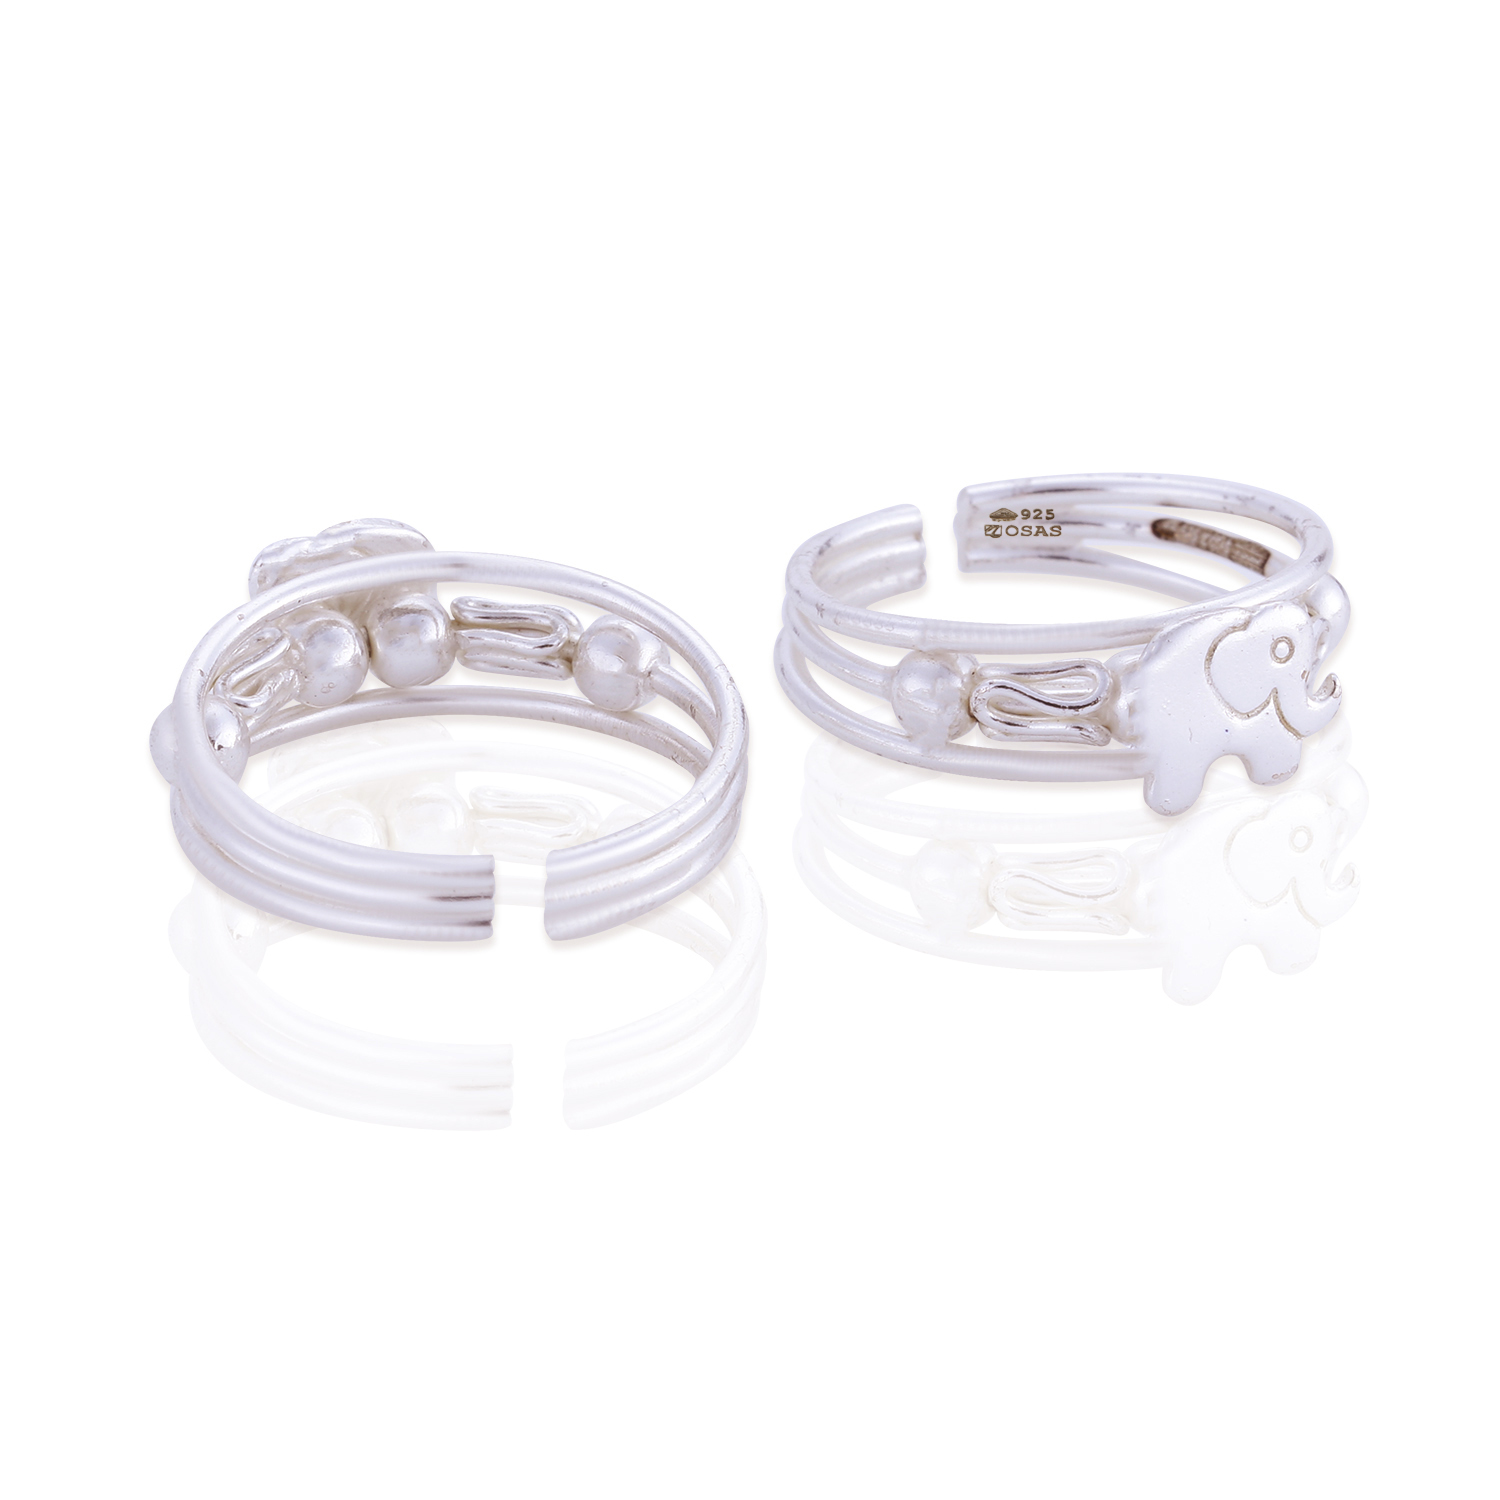 Buy Anaval Finger Ring in India | Chungath Jewellery Online- Rs. 23,280.00